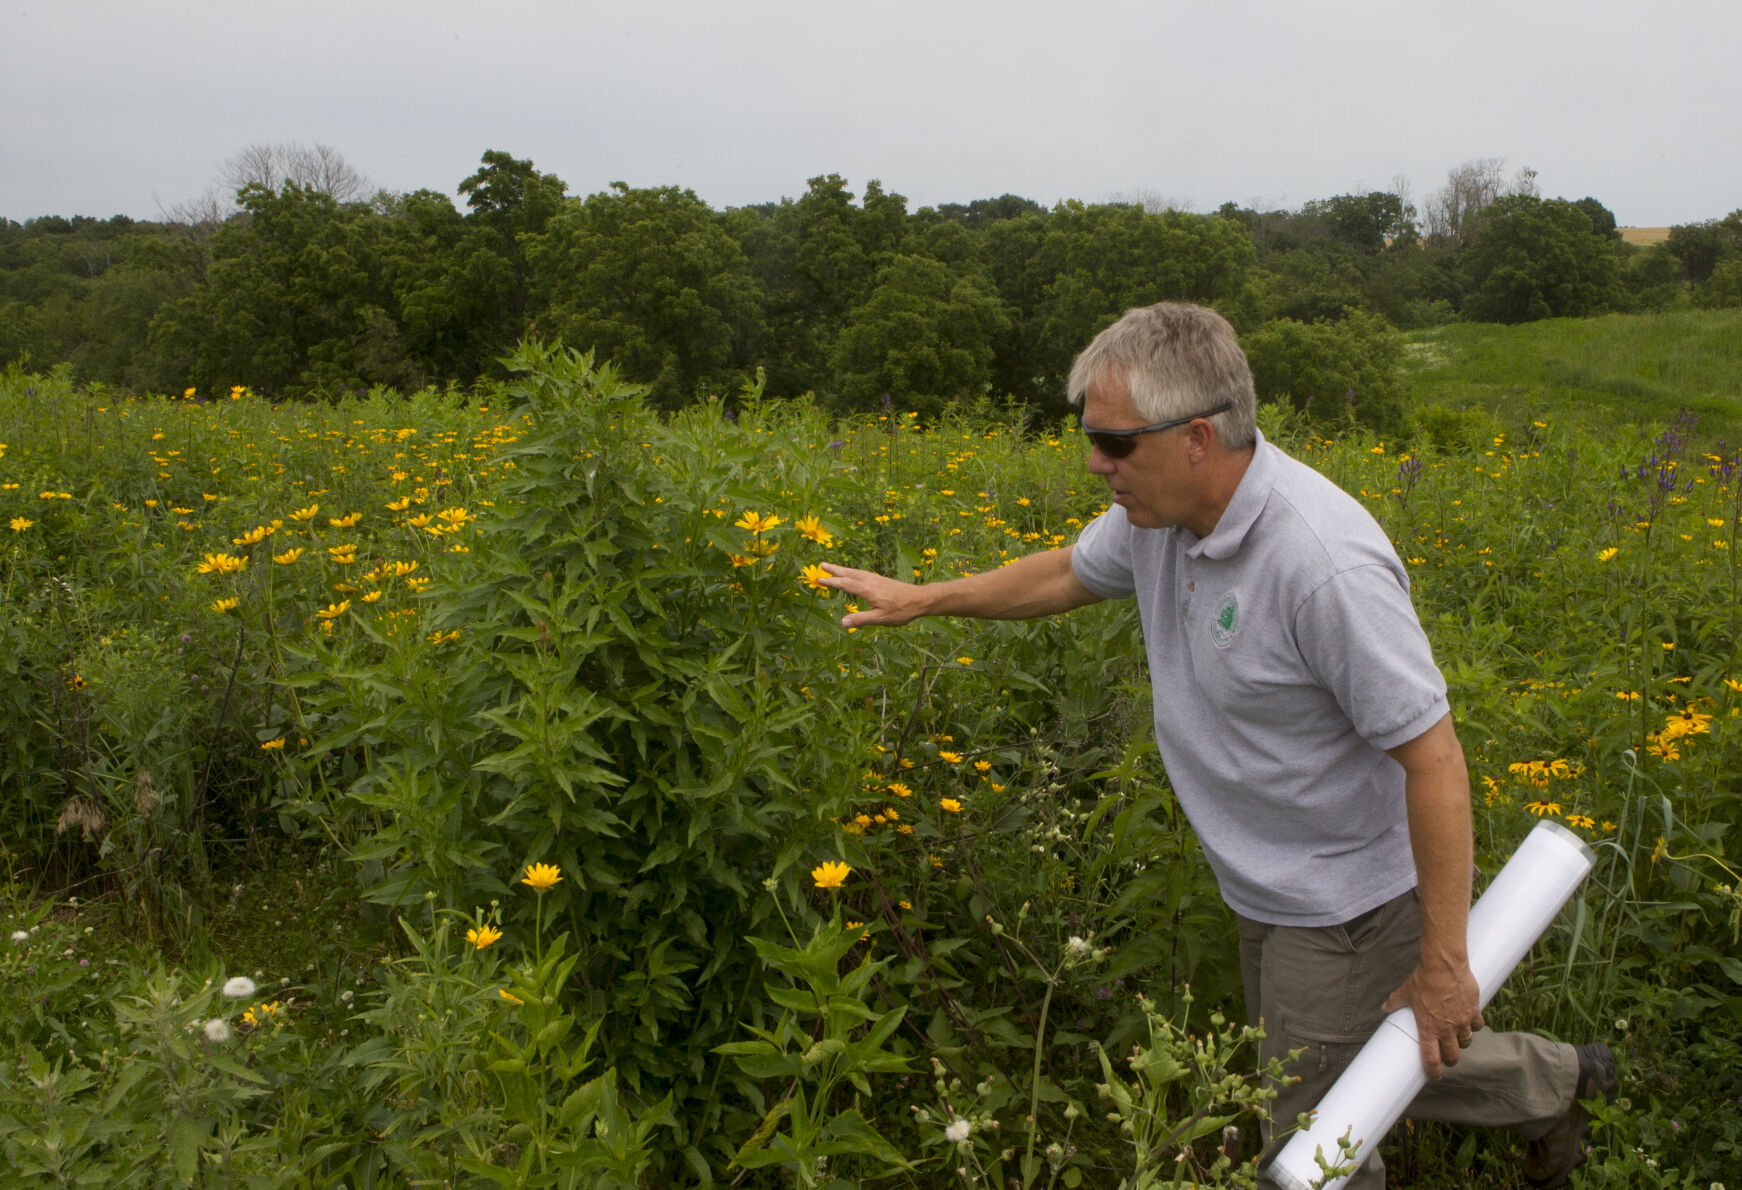 Steve Barg, executive director of Jo Daviess Conservation Foundation, walks through Gateway Park a 100-acre park and trail on the outskirts of Galena, Ill.    PHOTO CREDIT: File photo